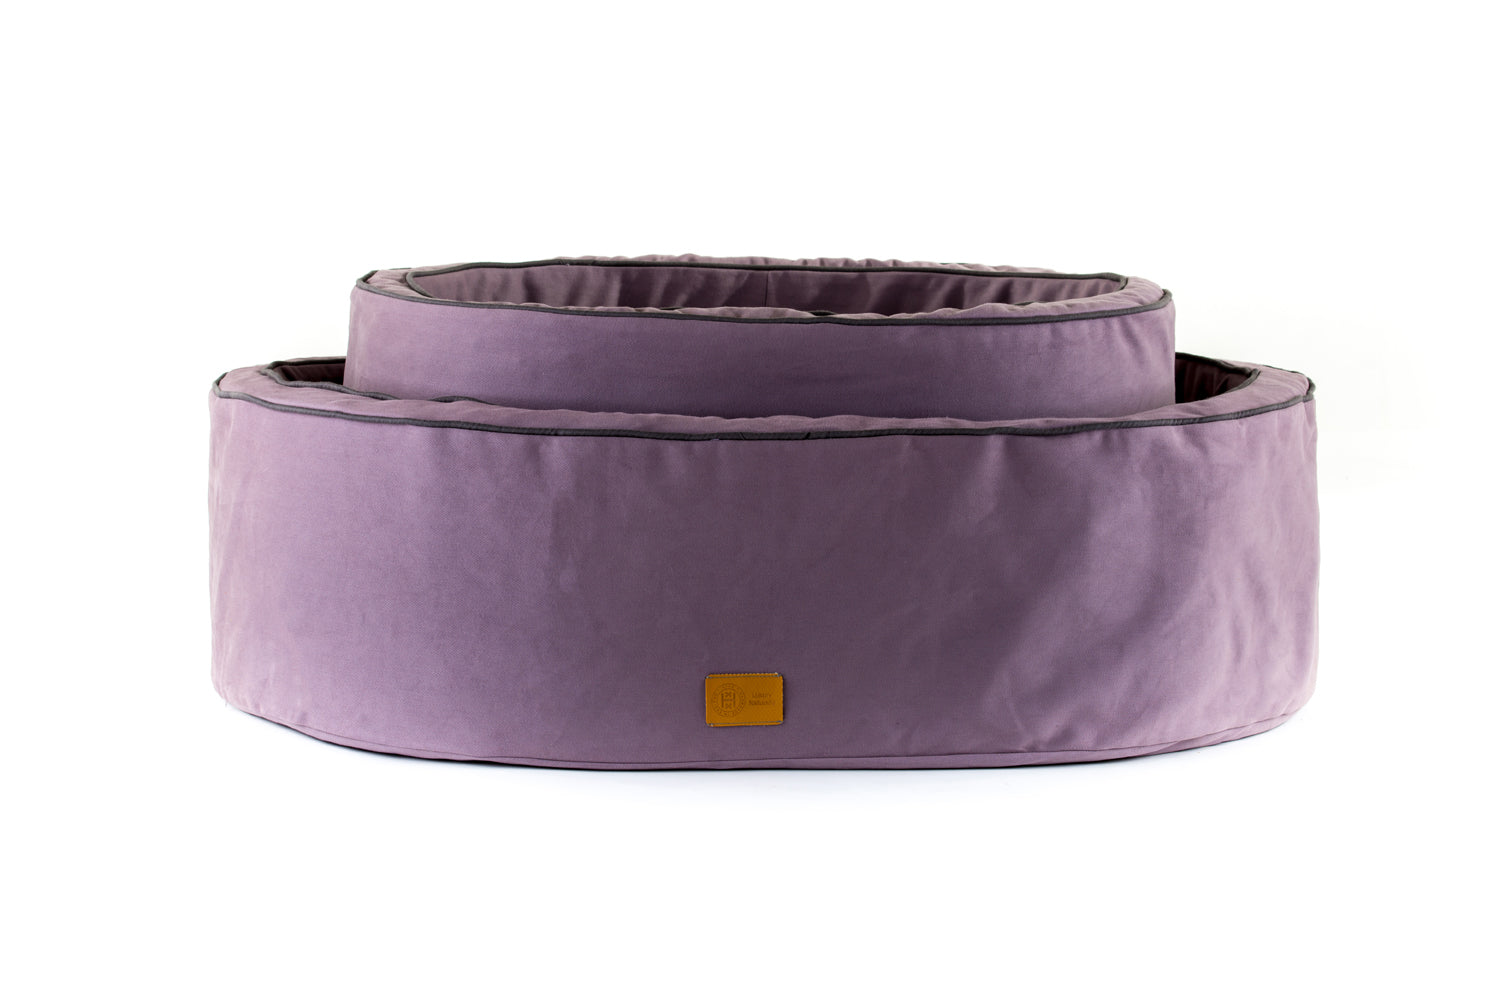 Nest Dog Bed Covers